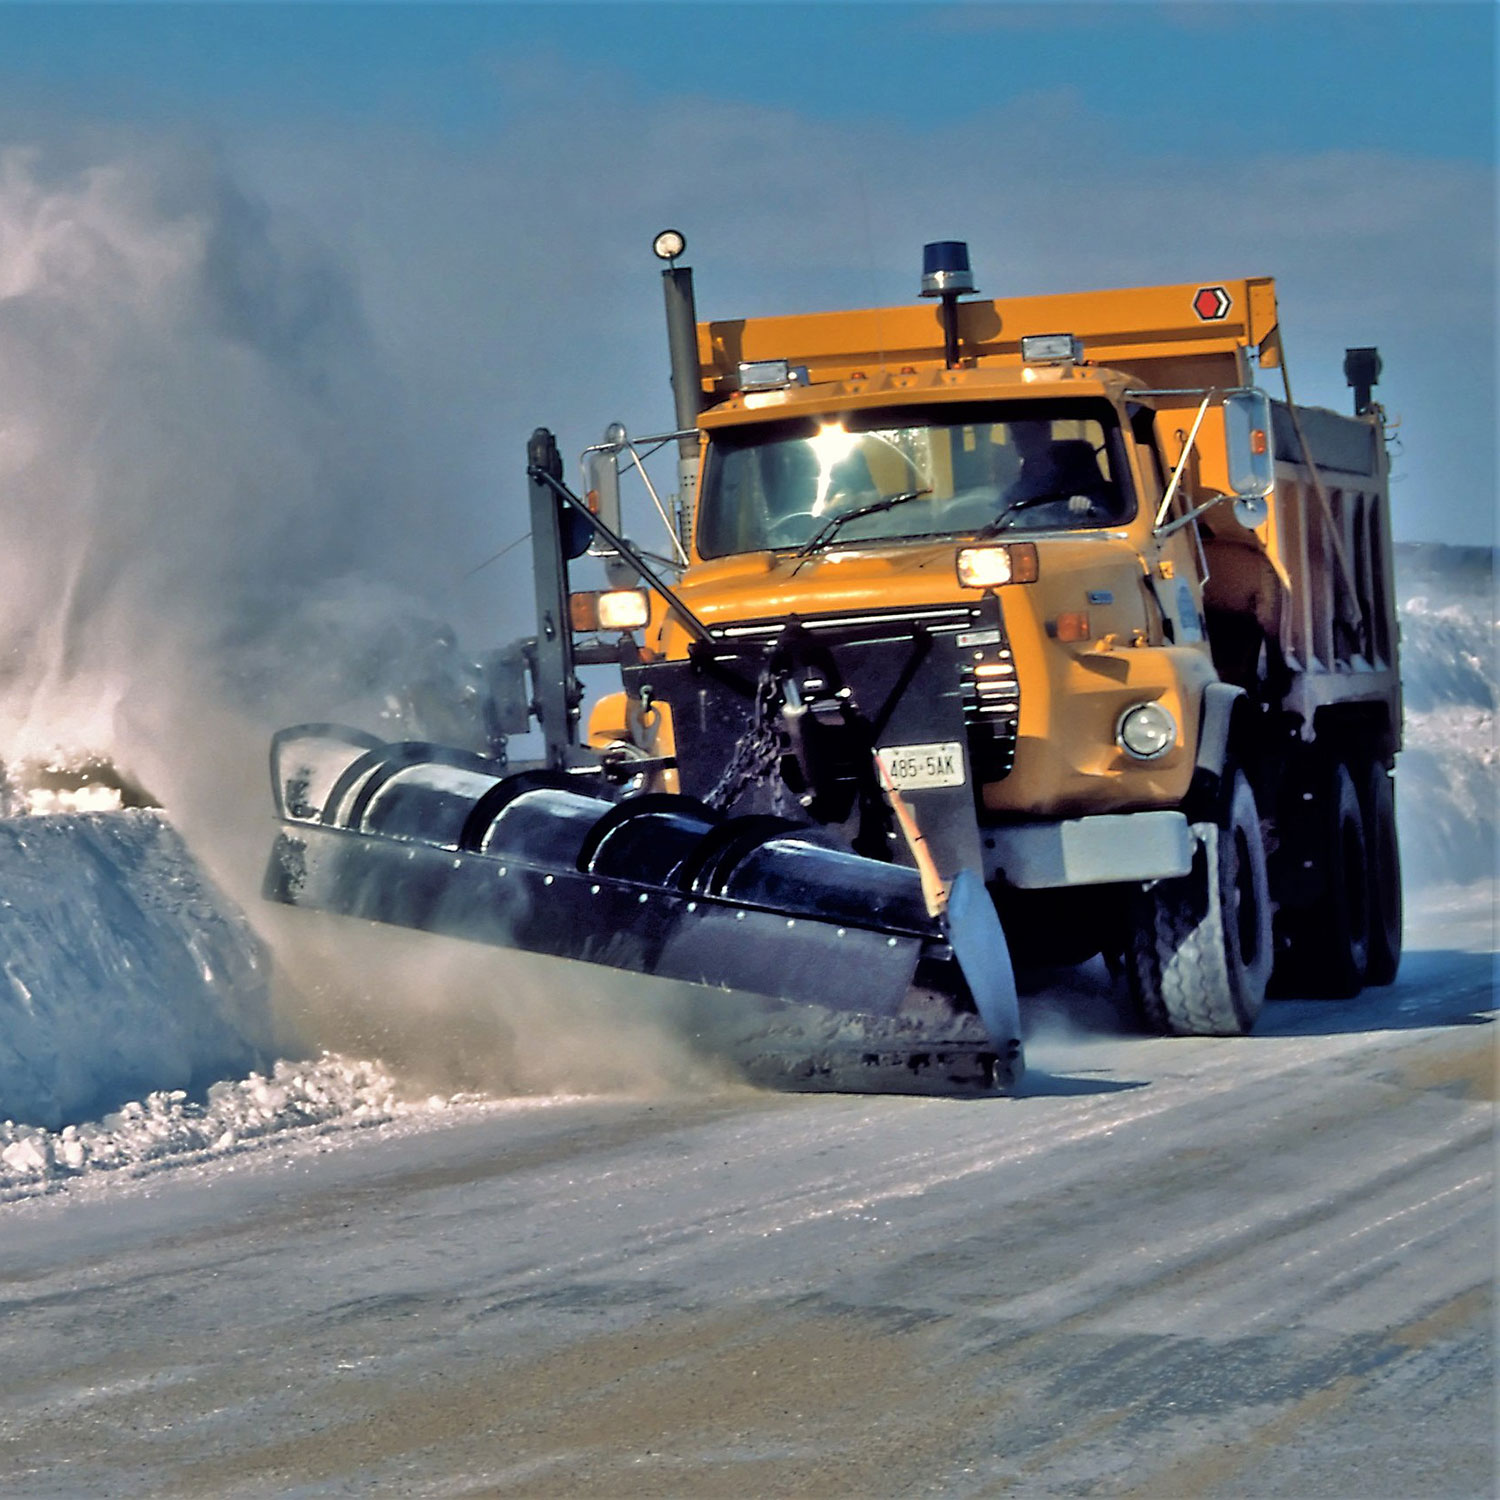 rubber snow blade clearing snow on road